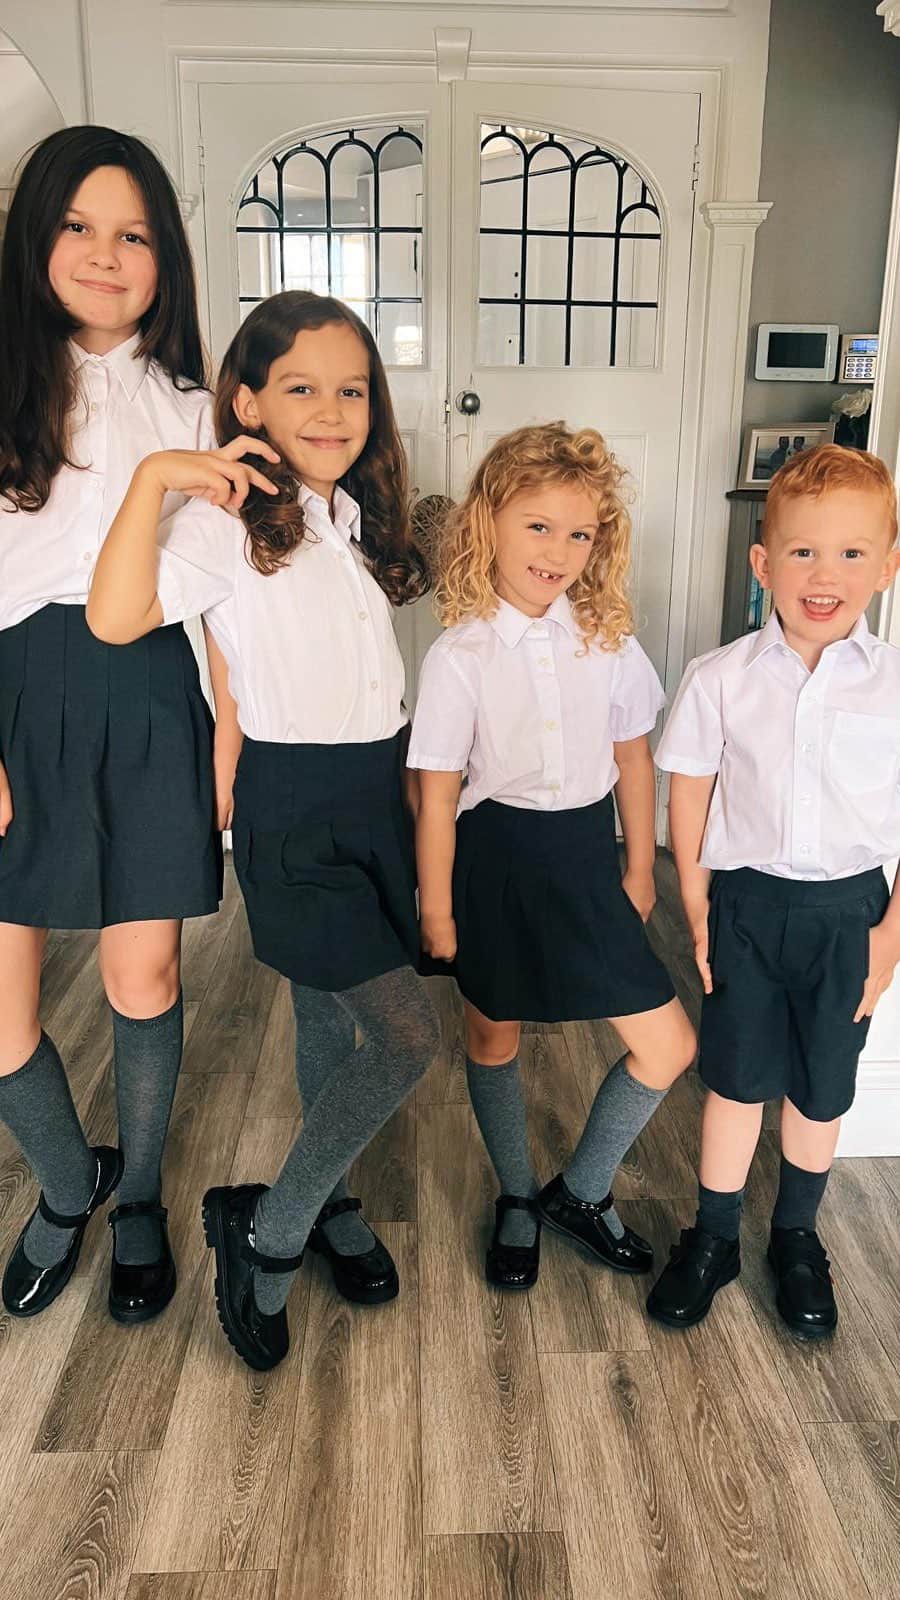 Anna Sacconeのインスタグラム：「ad We’re getting ready for school with Deichmann! 🏫📚🎒 Right now Deichmann are offering buy one get one half price on all school shoes from 24th of July till 10th of September! 🤩 With tons of premium affordable brands to choose from & amazing features like scuff resistance, Microfresh & touch fastening back to school shoe shopping is stress free and easy! 🥰  #WeAreDeichmann  #deichmannbacktoschool」